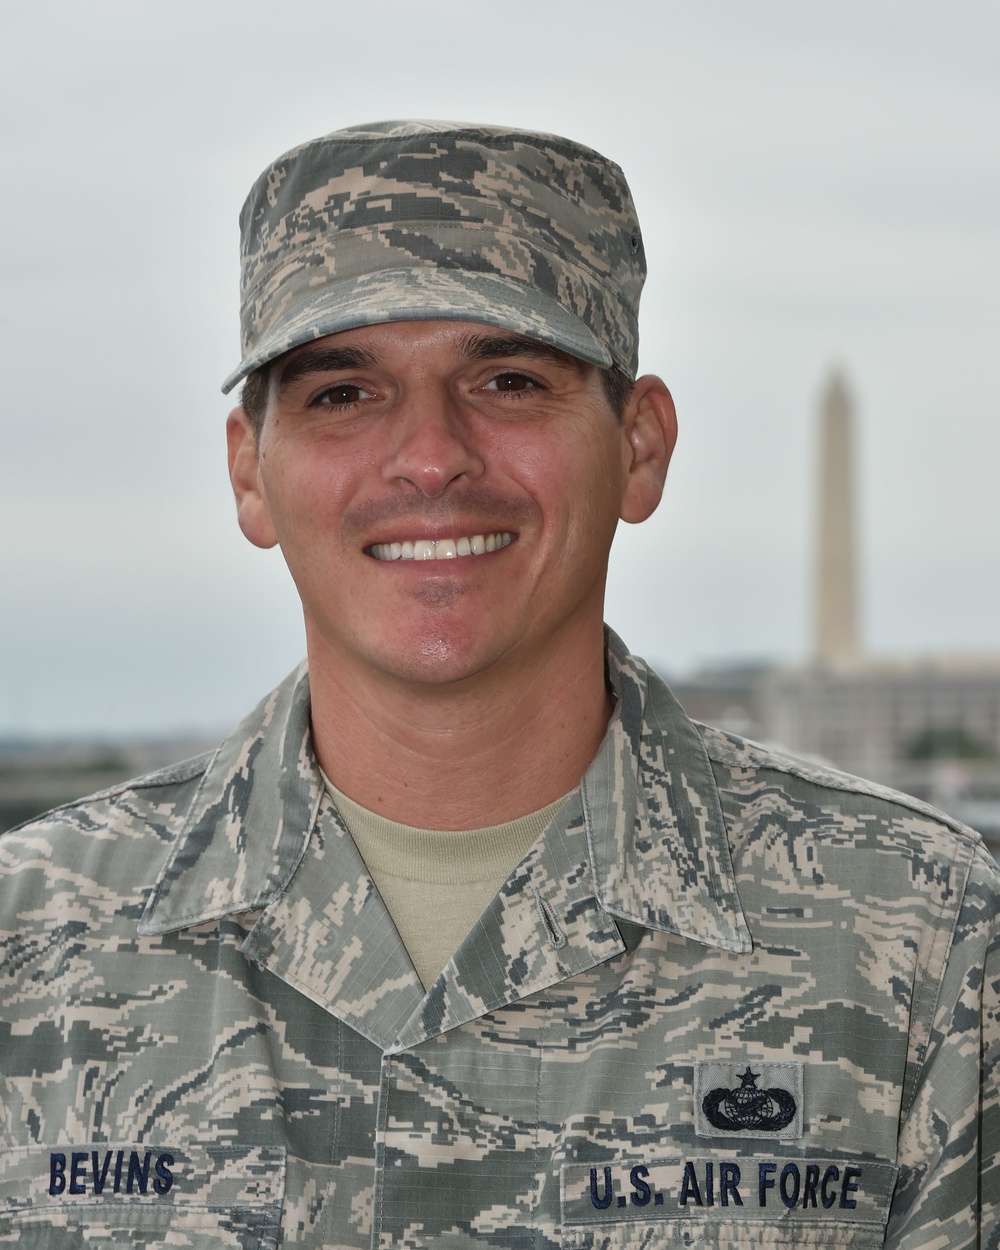 Technical Sergeant Bevins supports the Presidential Inauguration